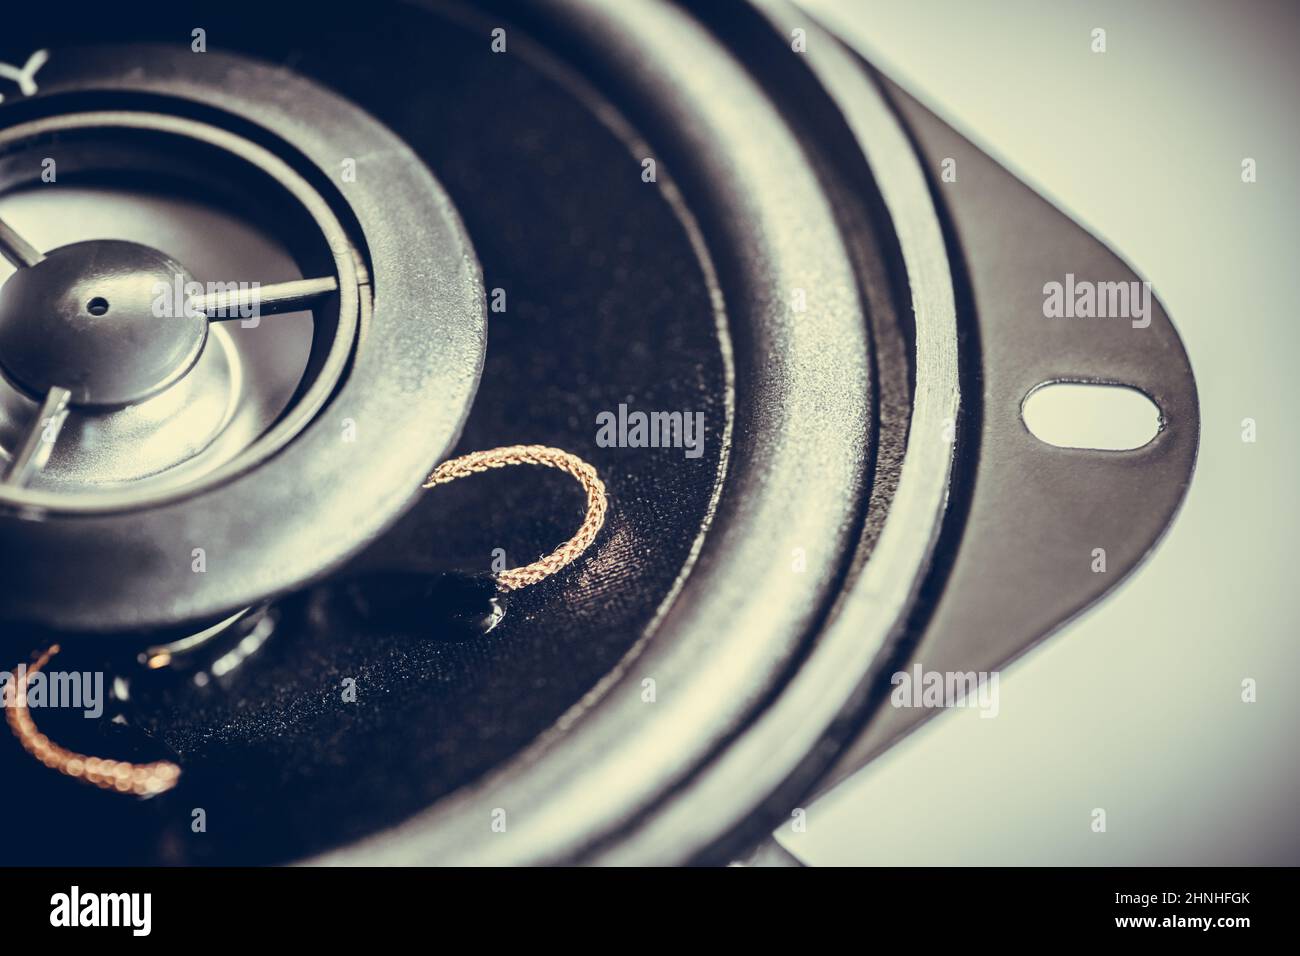 Close up shot of a new car audio speaker. Stock Photo